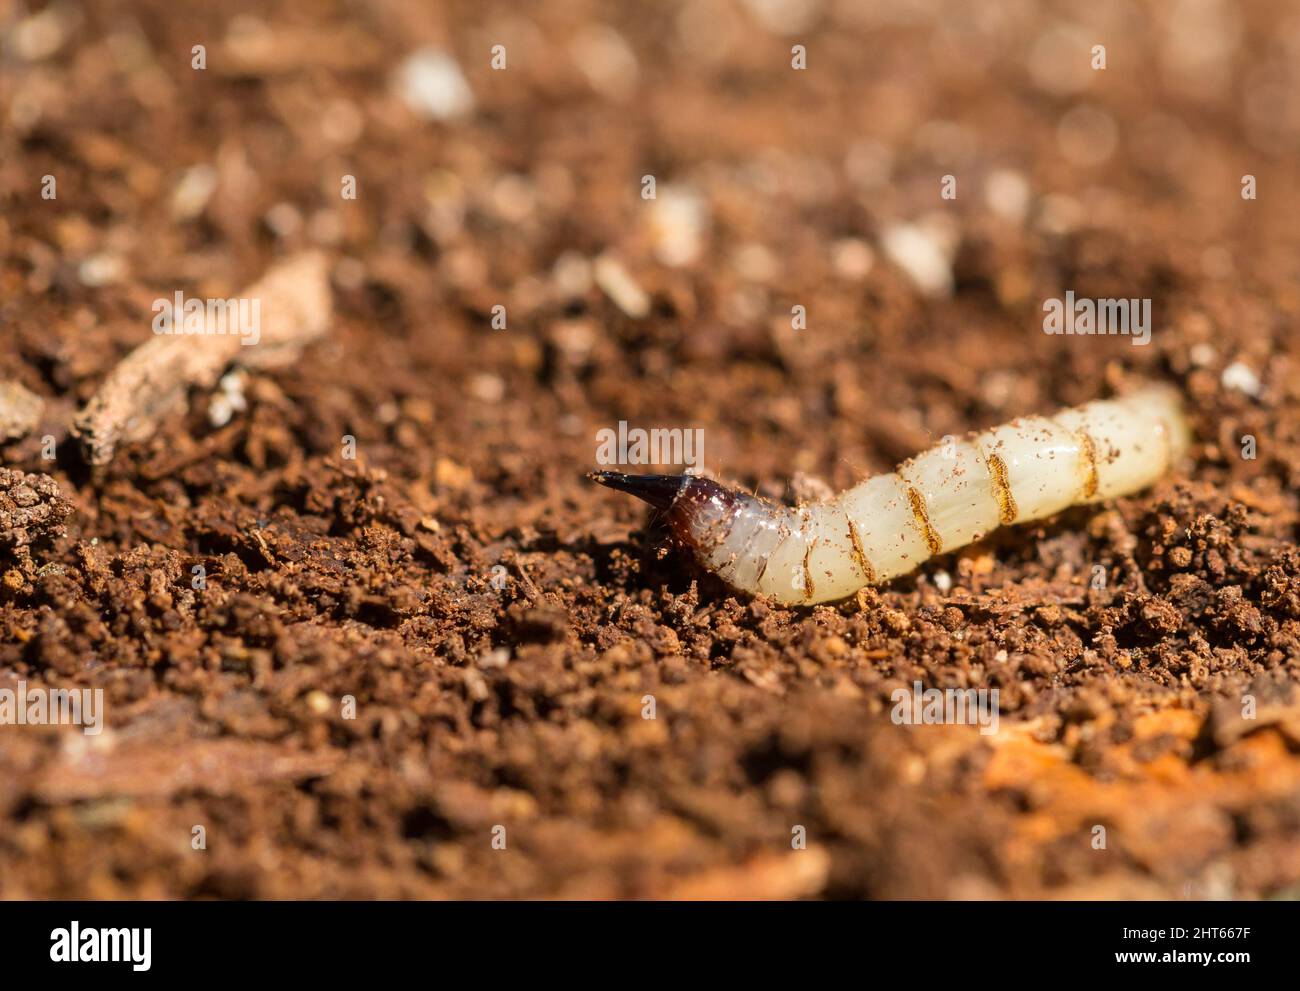 Awl-fly larva on rotten wood (Xylophagus sp) Stock Photo